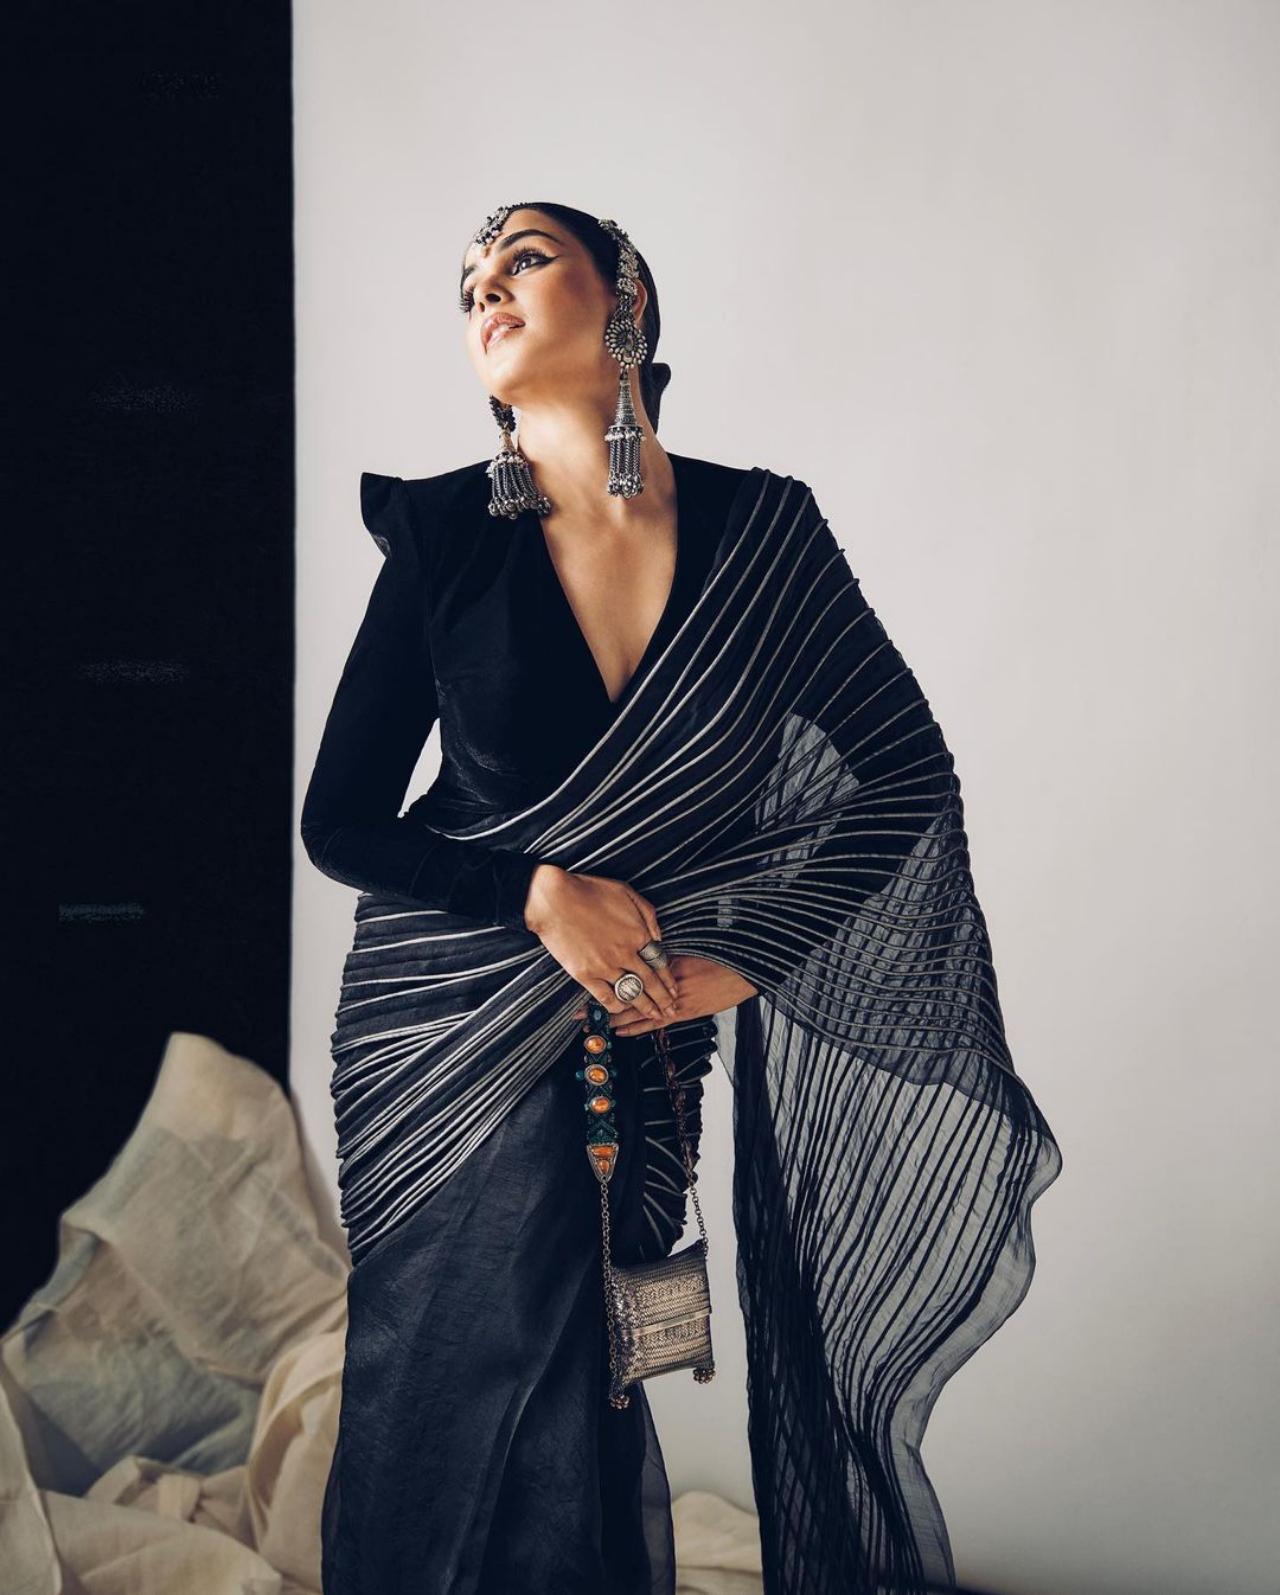 Genelia Deshmukh stole the show with her gorgeous black saree that featured silver running lines along the pallu. The saree was paired with a stunning velvet blouse, designed with dramatic shoulders for that extra flair!